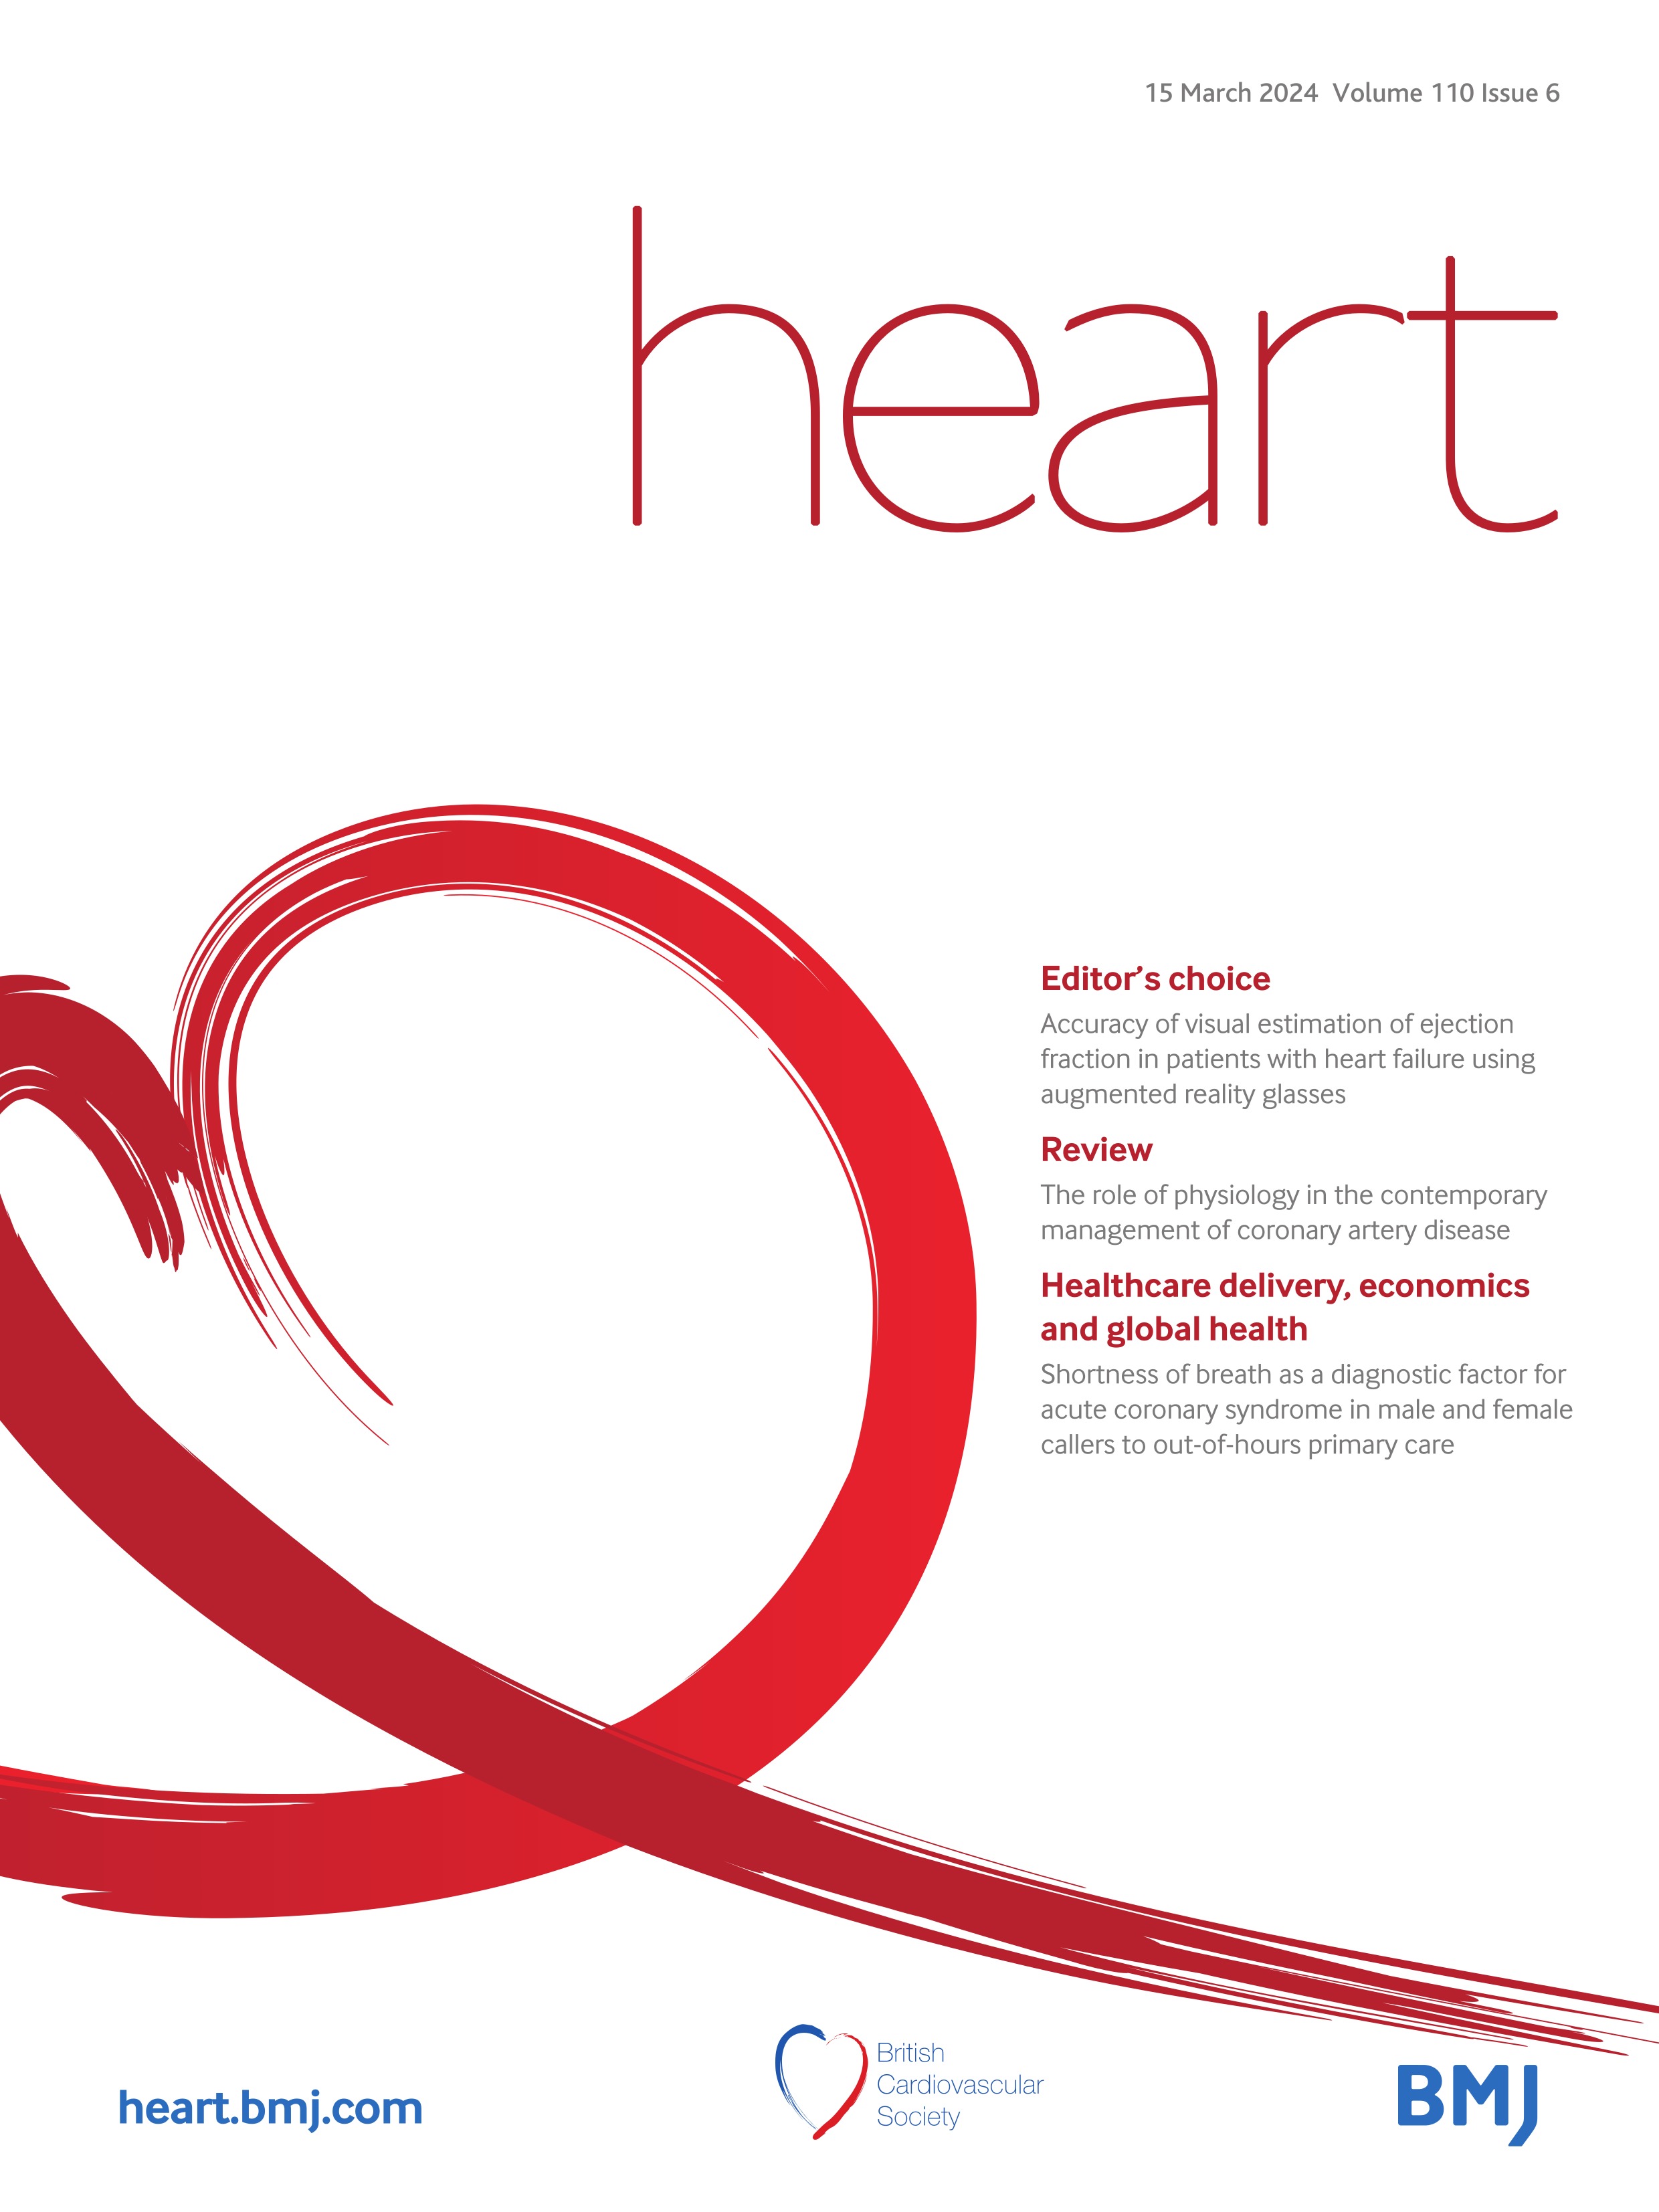 Prehospital risk assessment and direct transfer to a percutaneous coronary intervention centre in suspected acute coronary syndrome